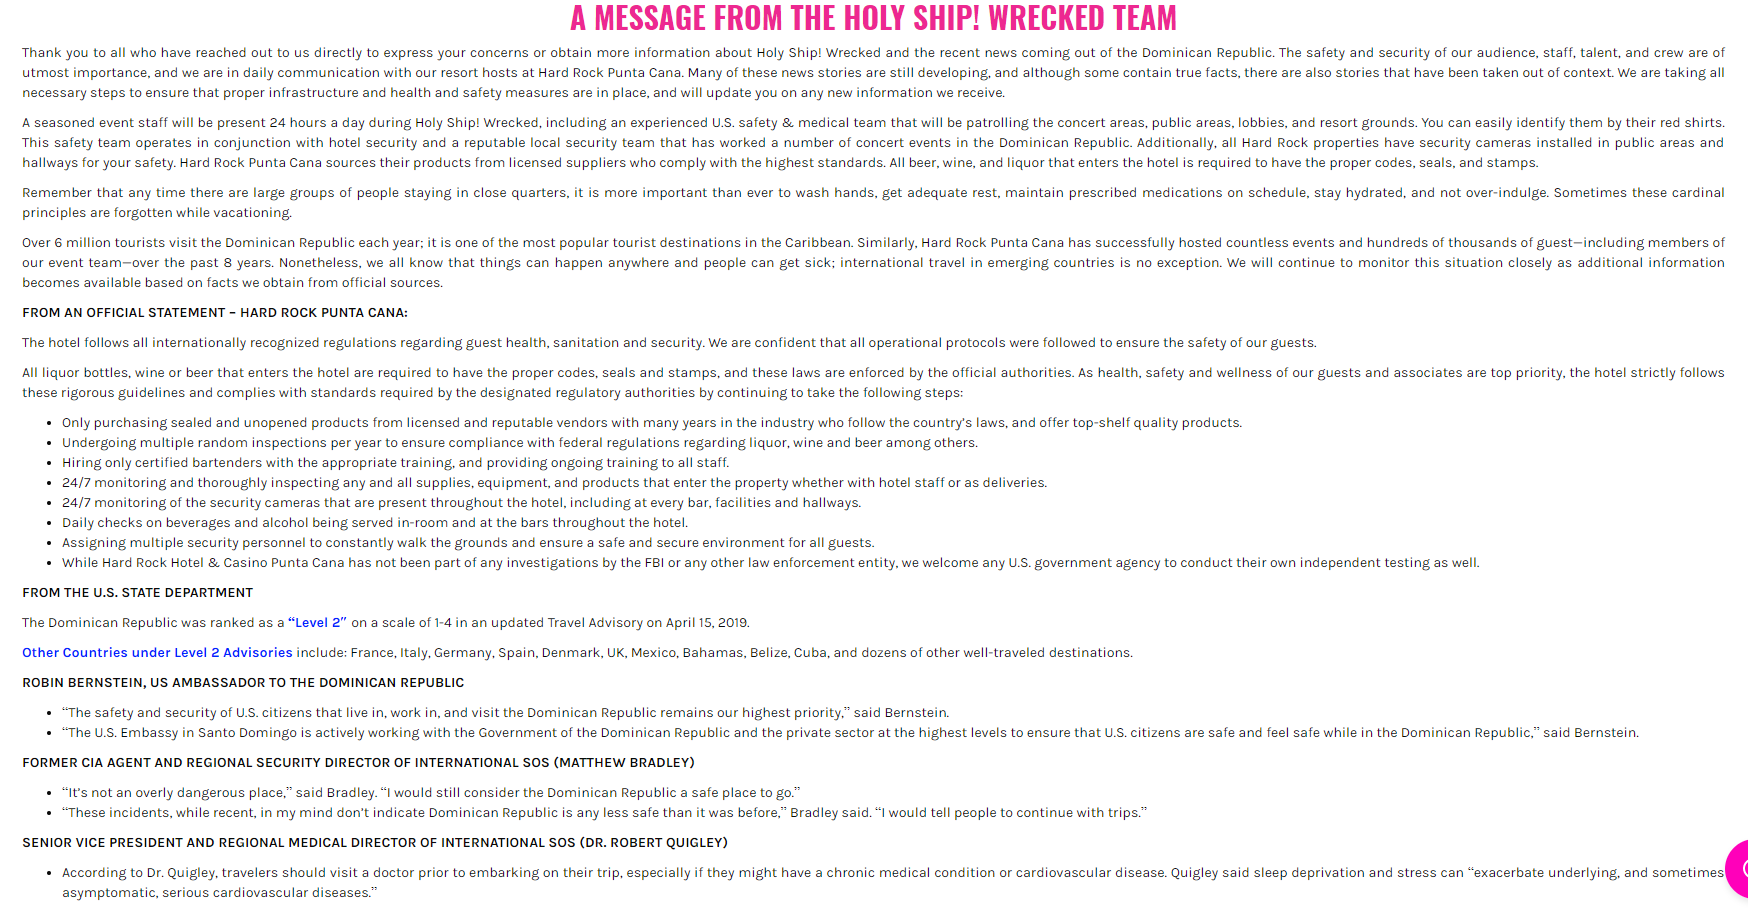 Holy Ship Wrecked Statement